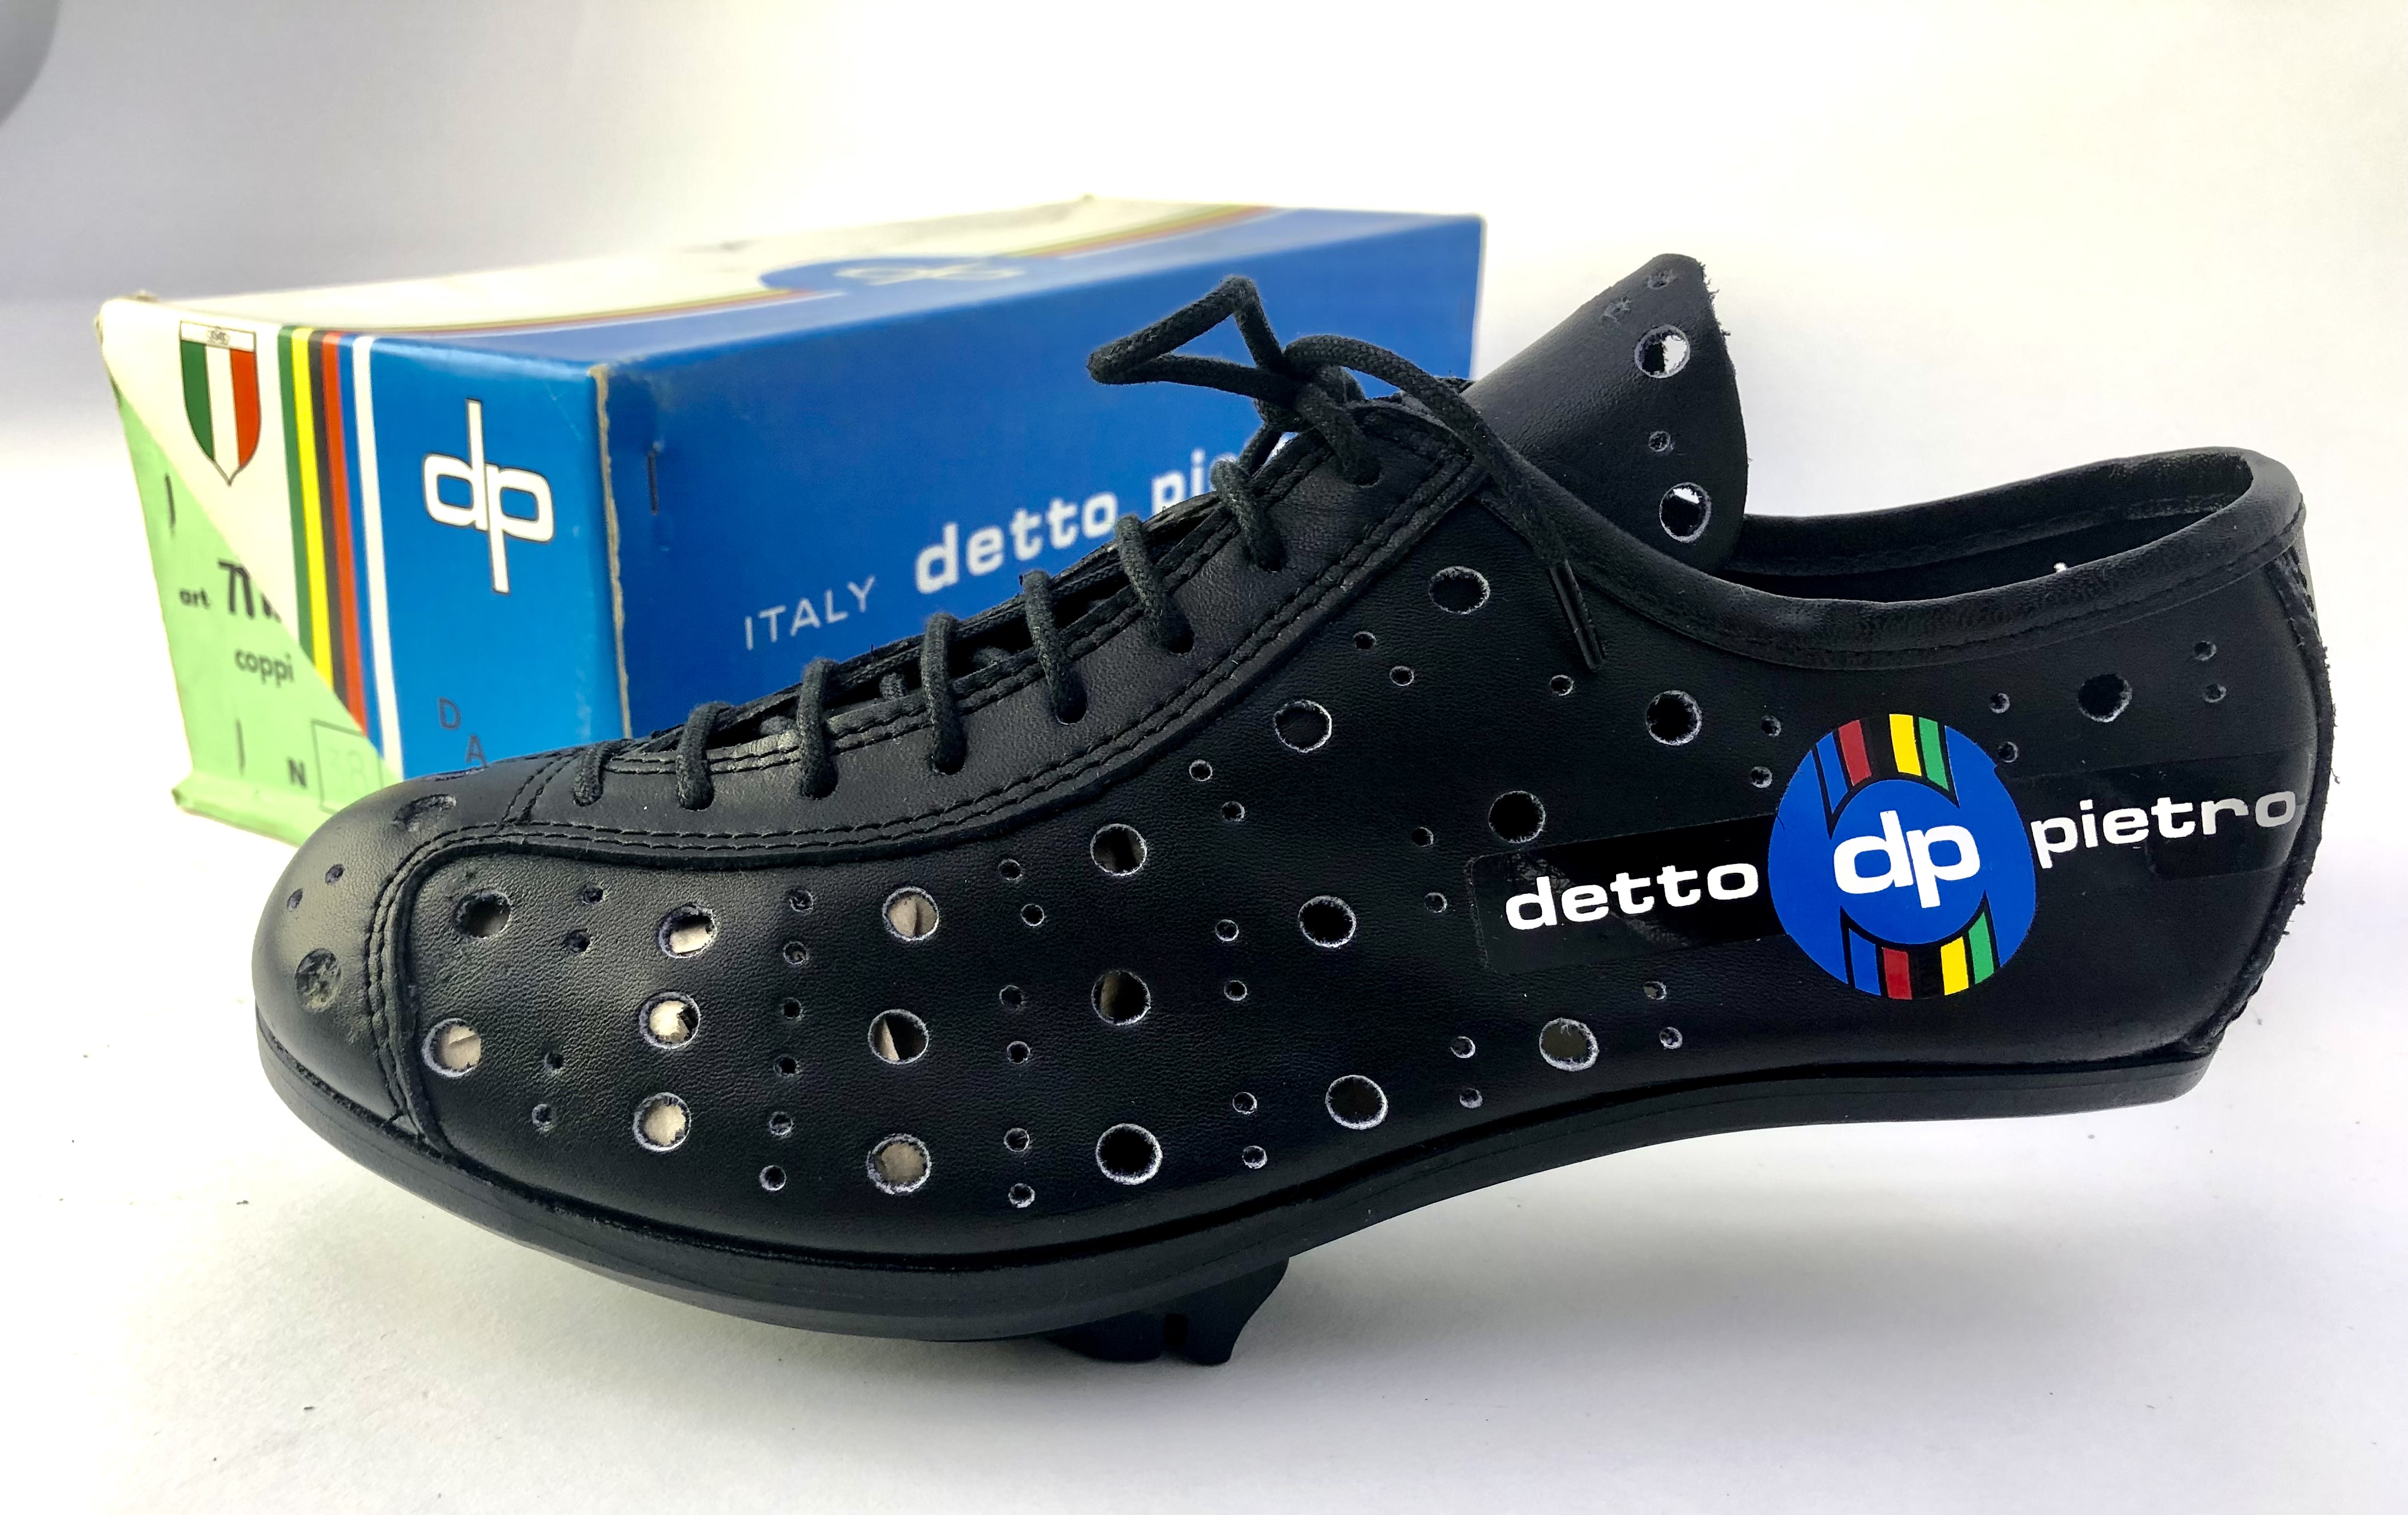 NOS Vintage Detto Pietro 7 TAR coppi Cycling Shoes Size 40